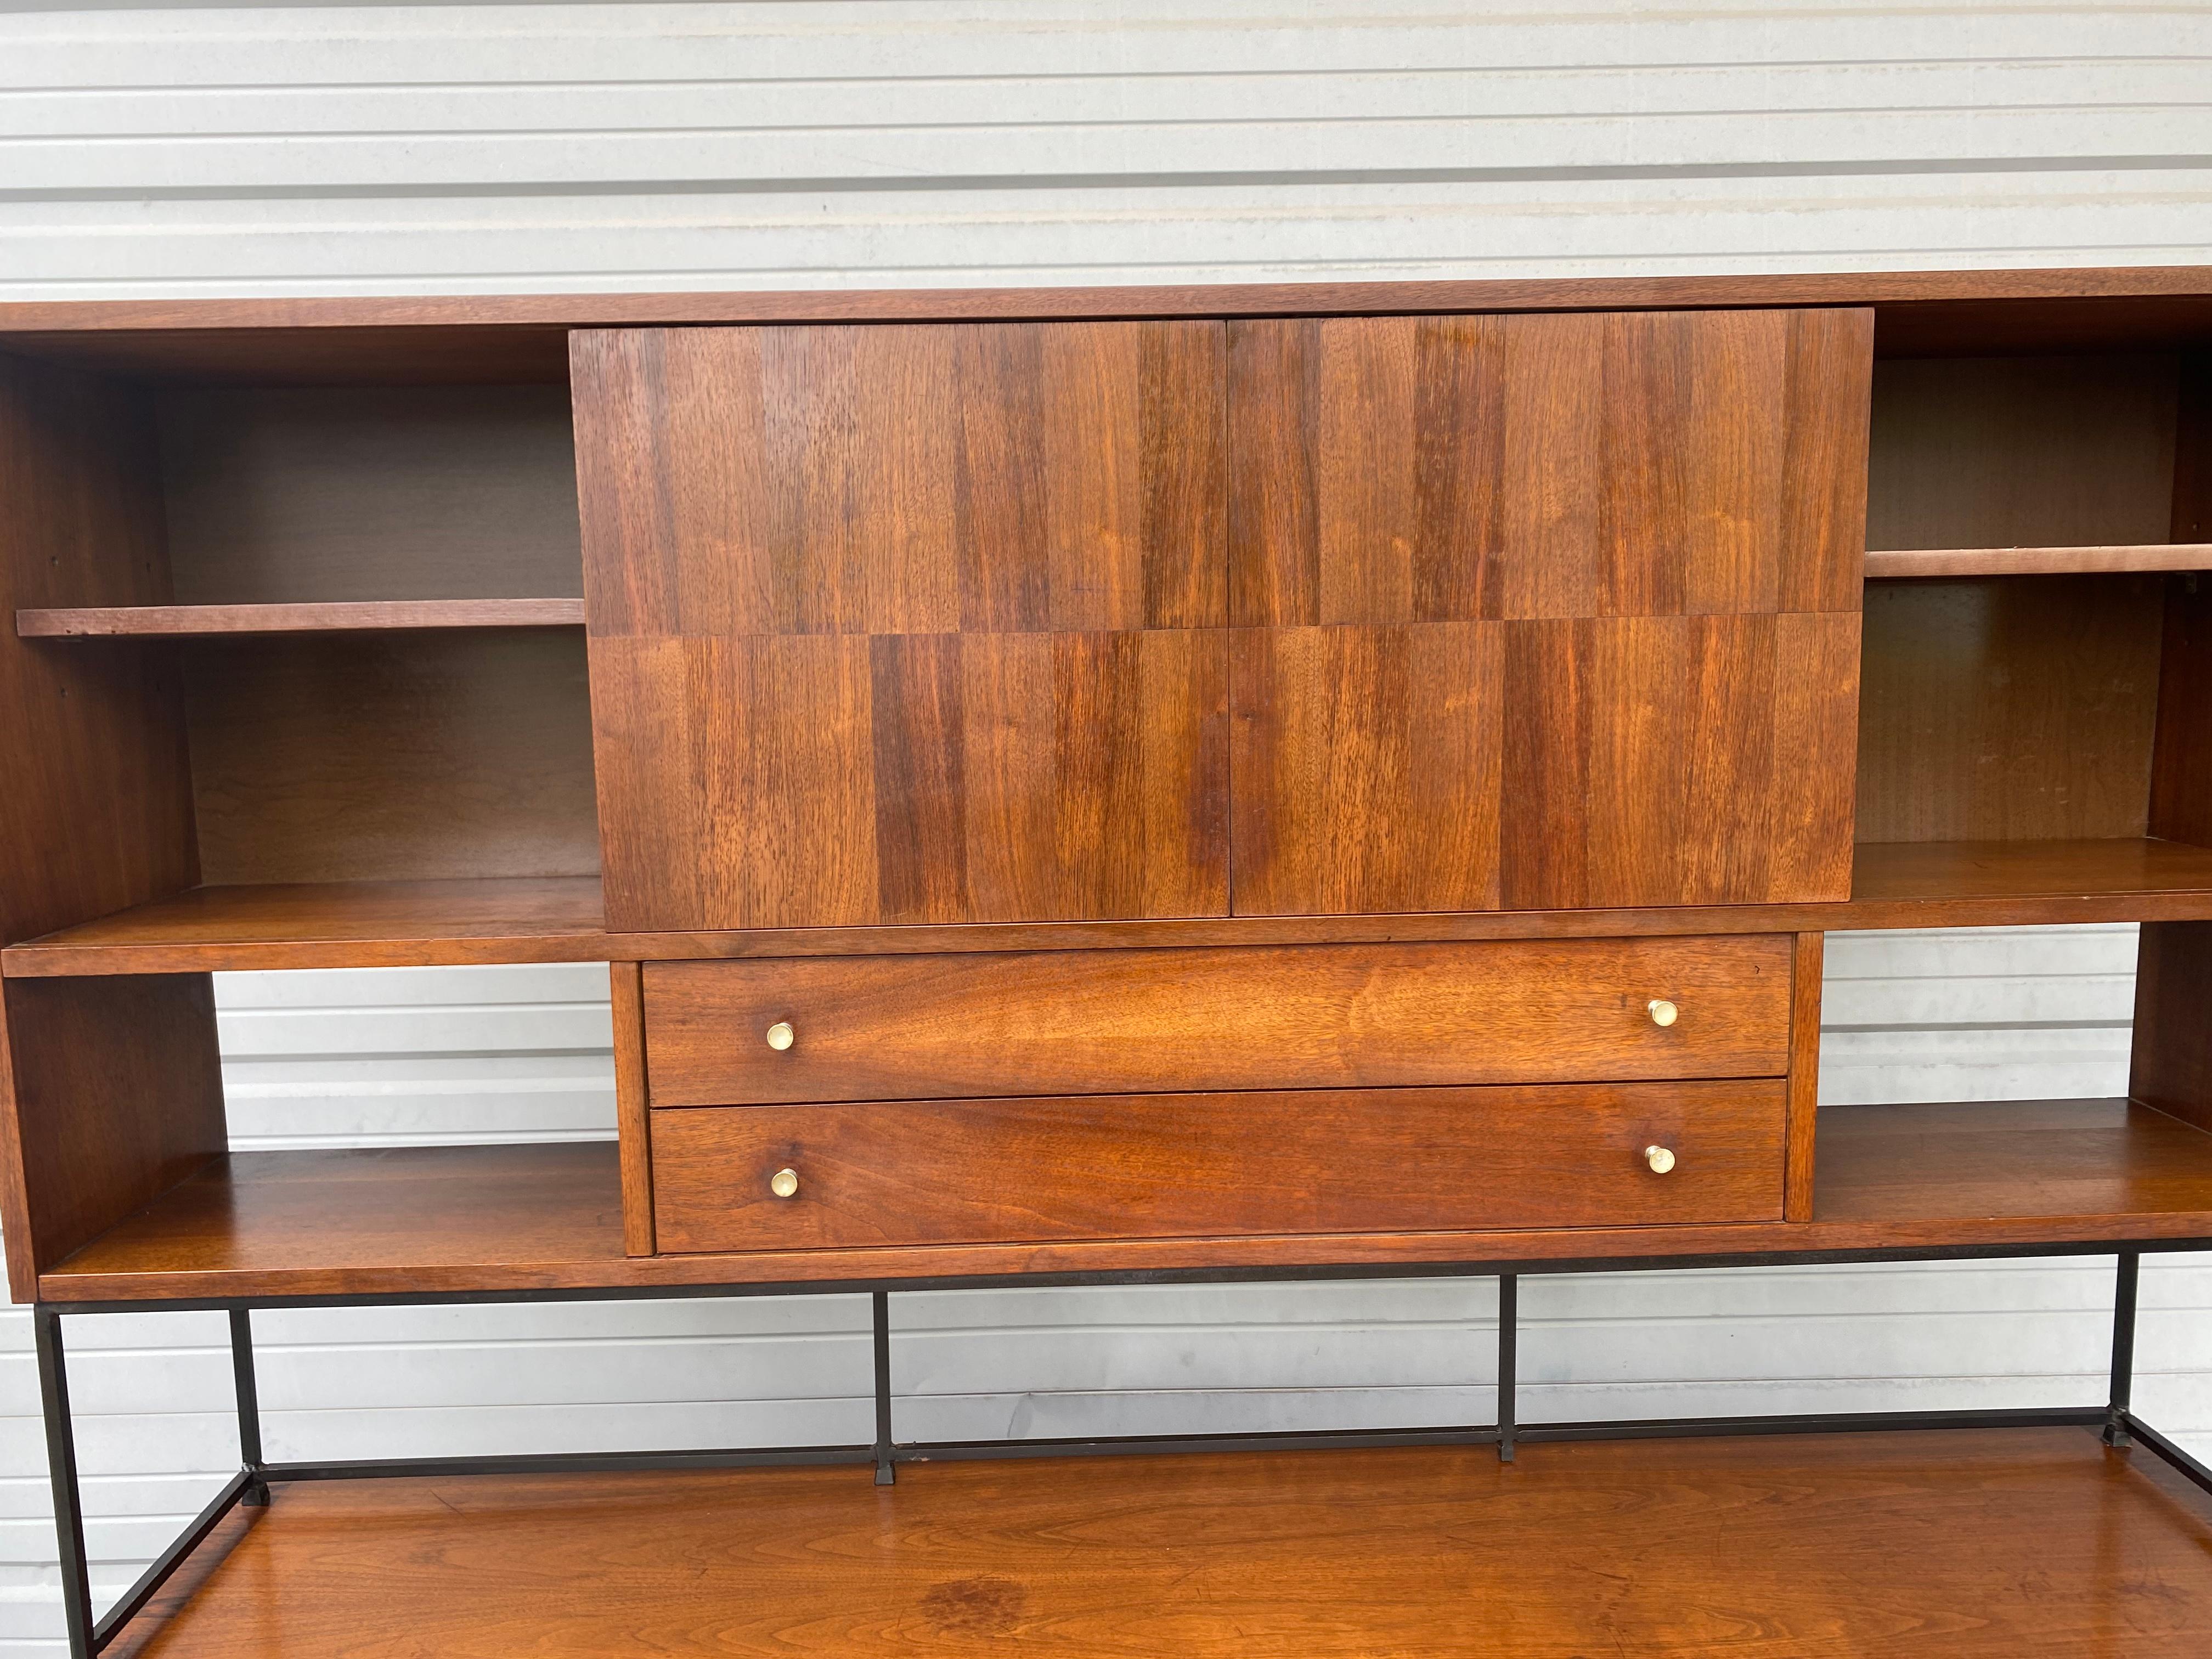 Aluminum Classic Modernist Wall Unit Long Credenza /Top by Stanley in Walnut and Rosewood